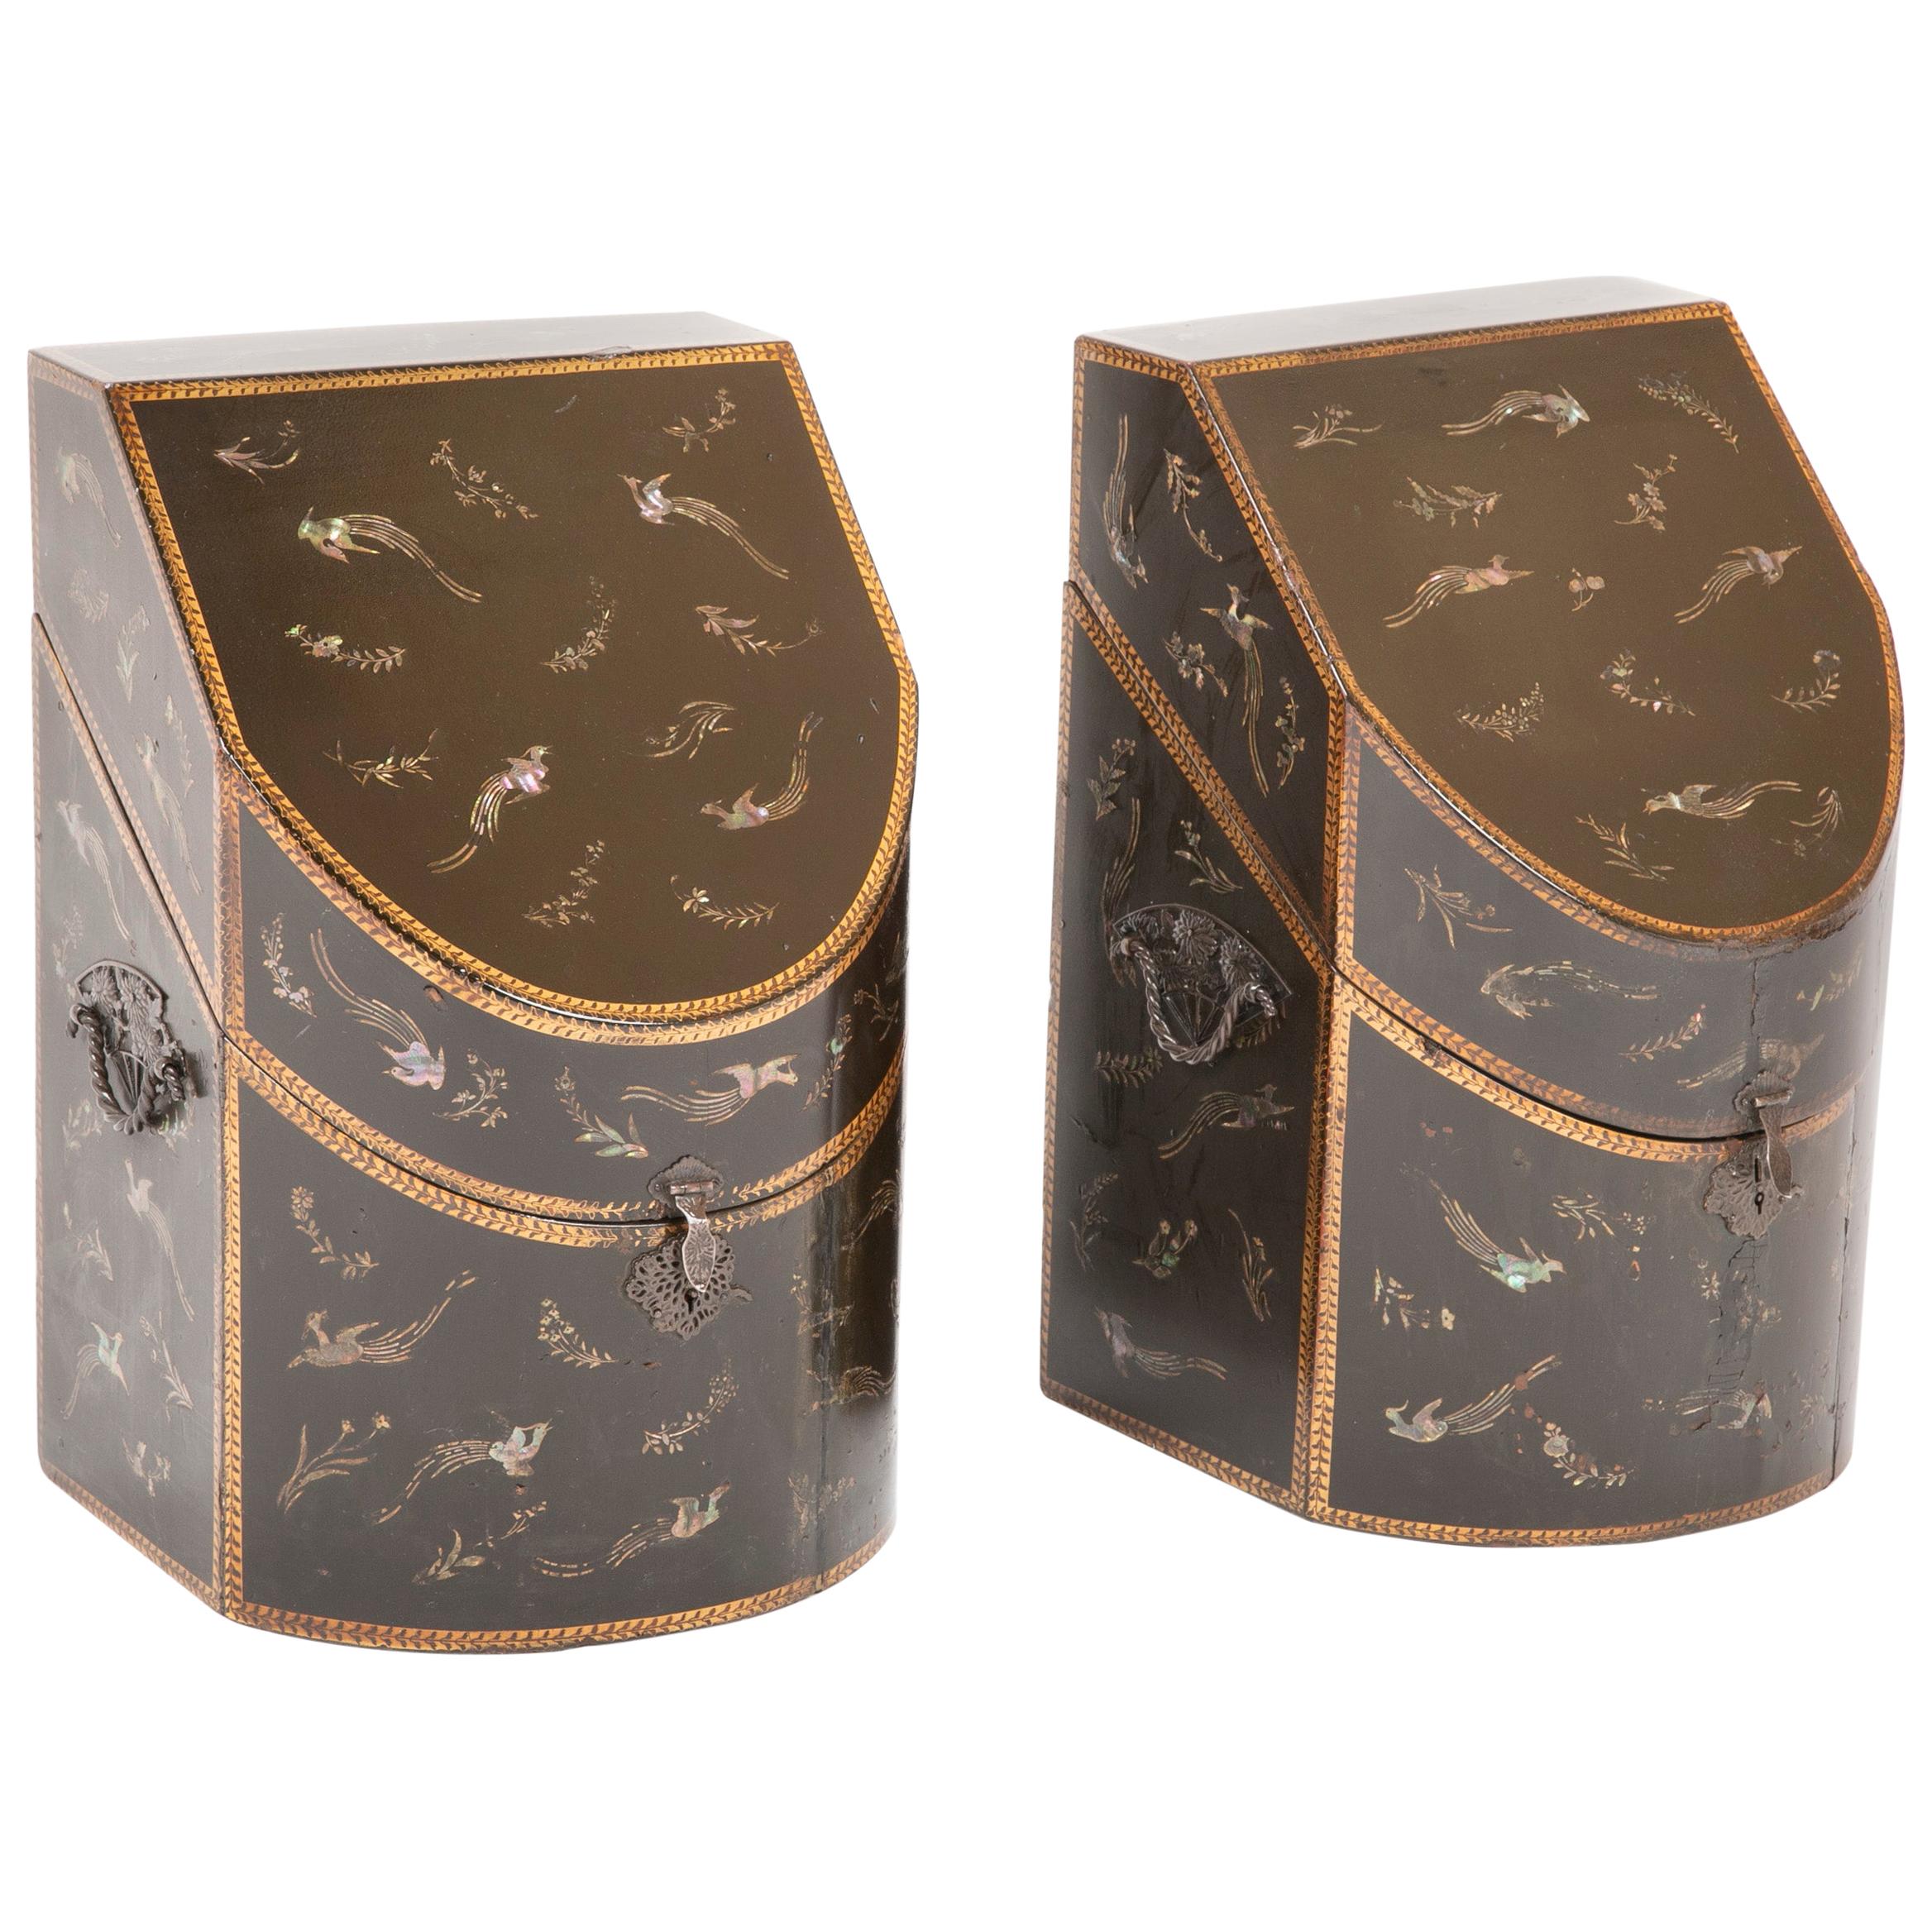 Rare pair of Japanese Nagasaki Export Lacquered Wood Knife Boxes For Sale